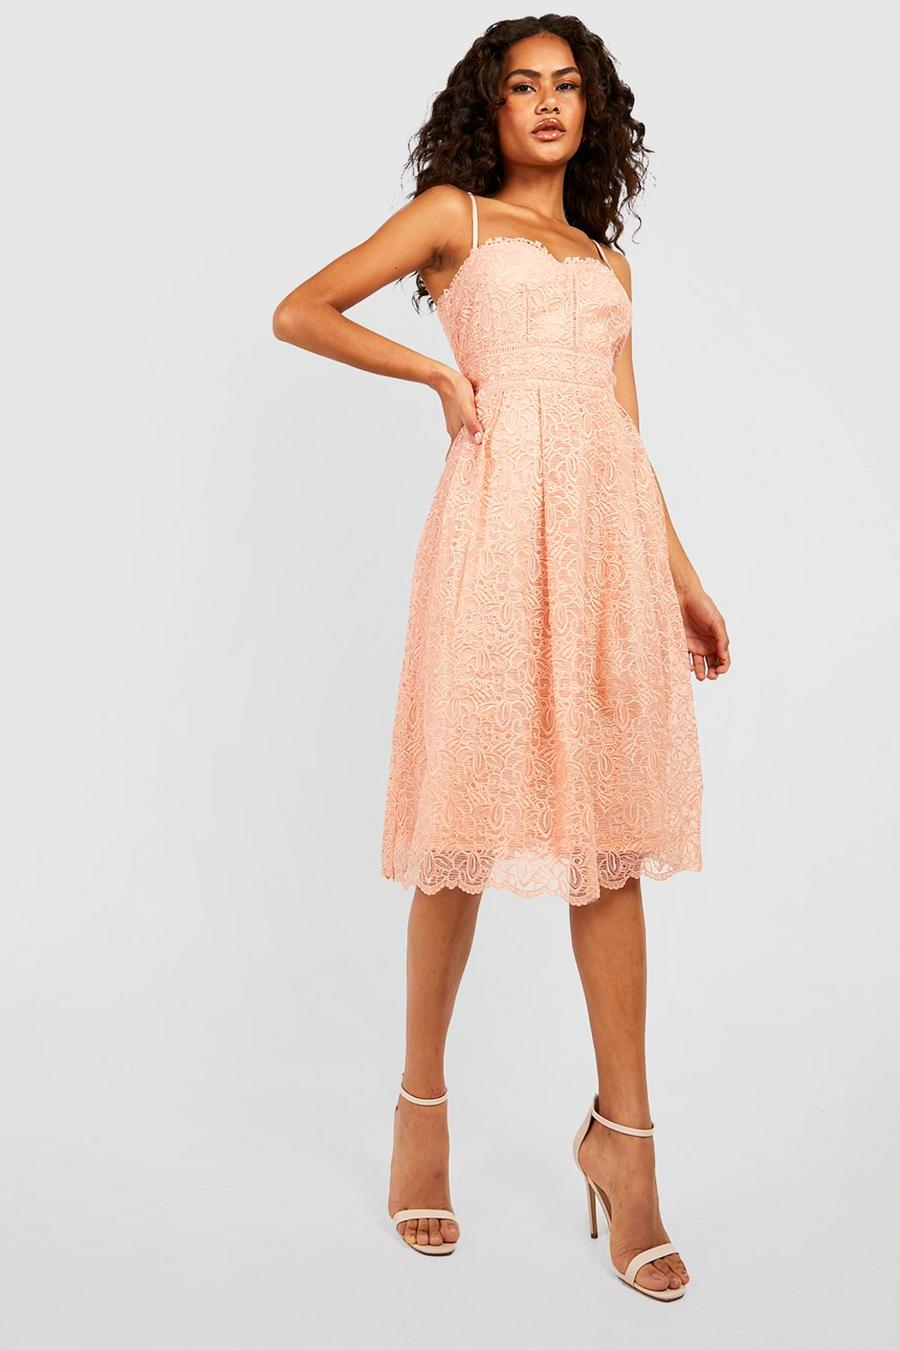 Blush pink Boutique Embroidered Strappy Midi Skater Dress